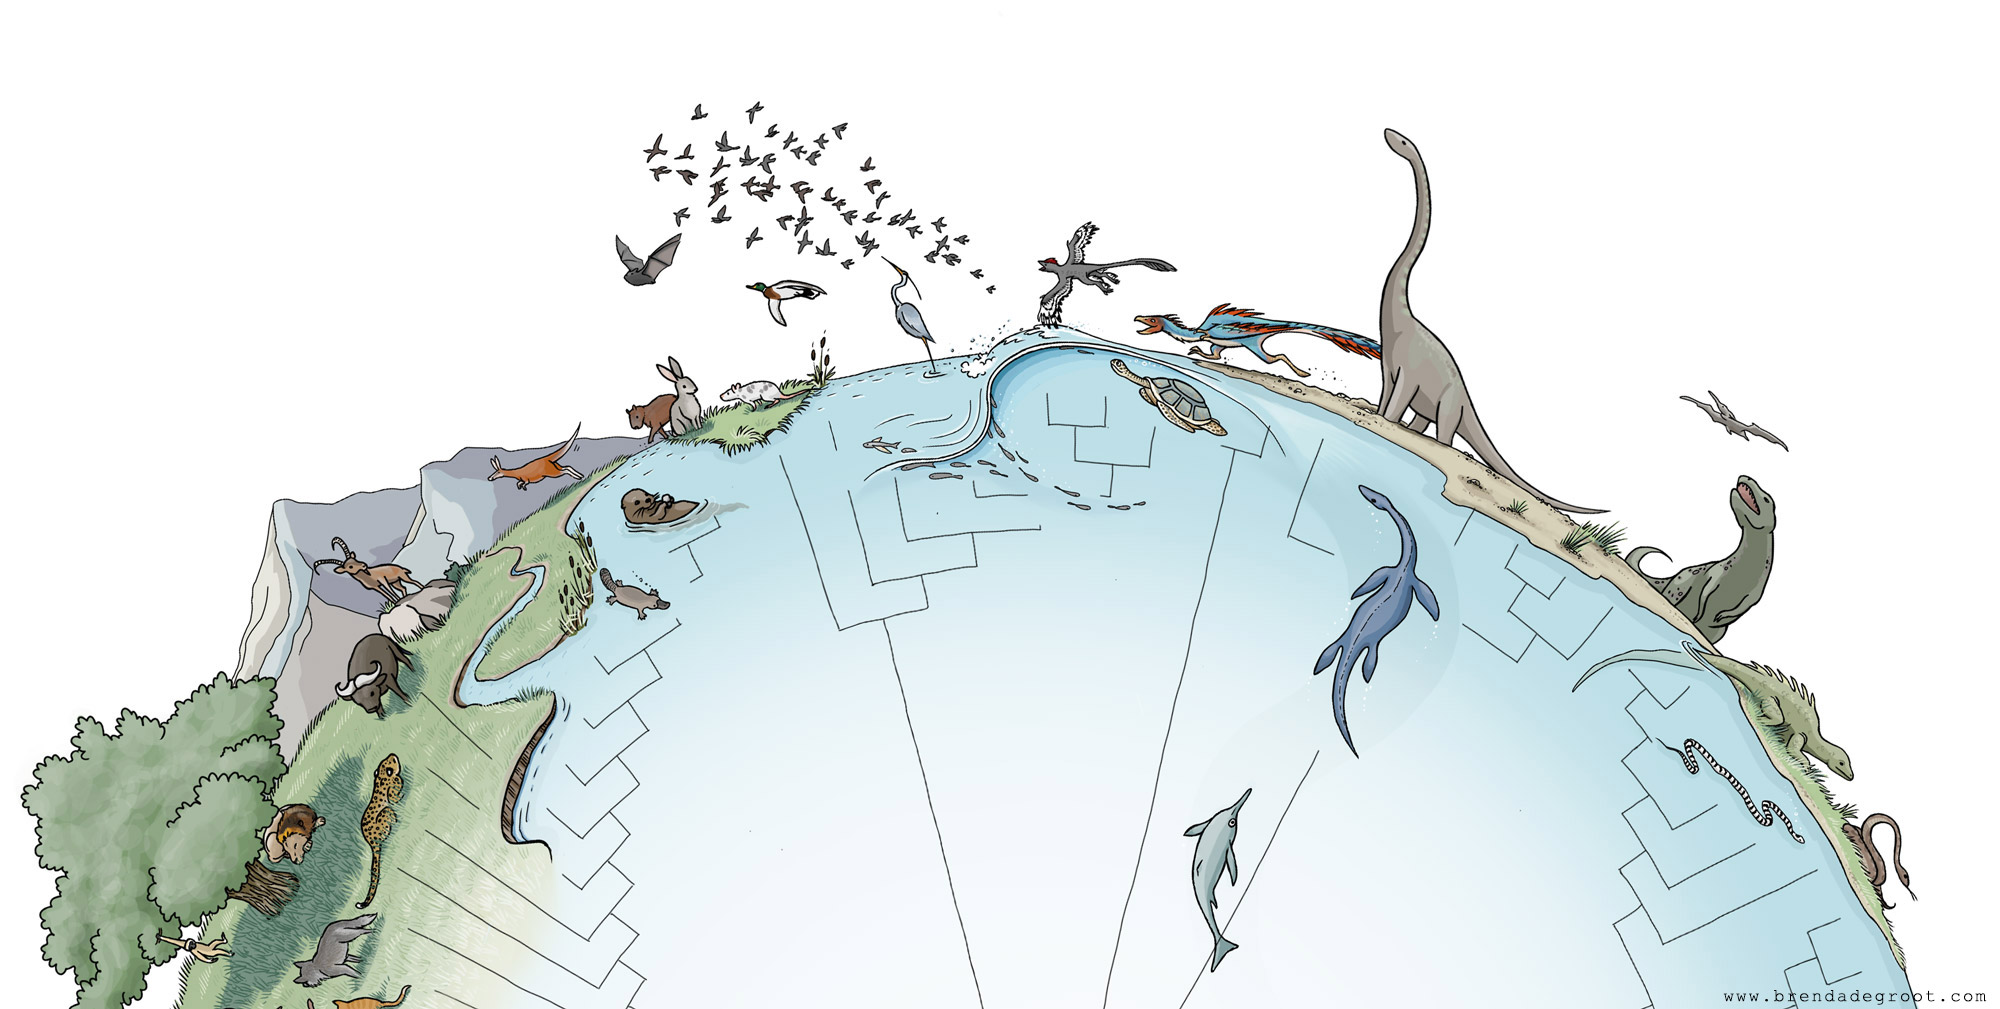 Circle of Life: Non-anthropocentric evolutionary tree - by Brenda de Groot